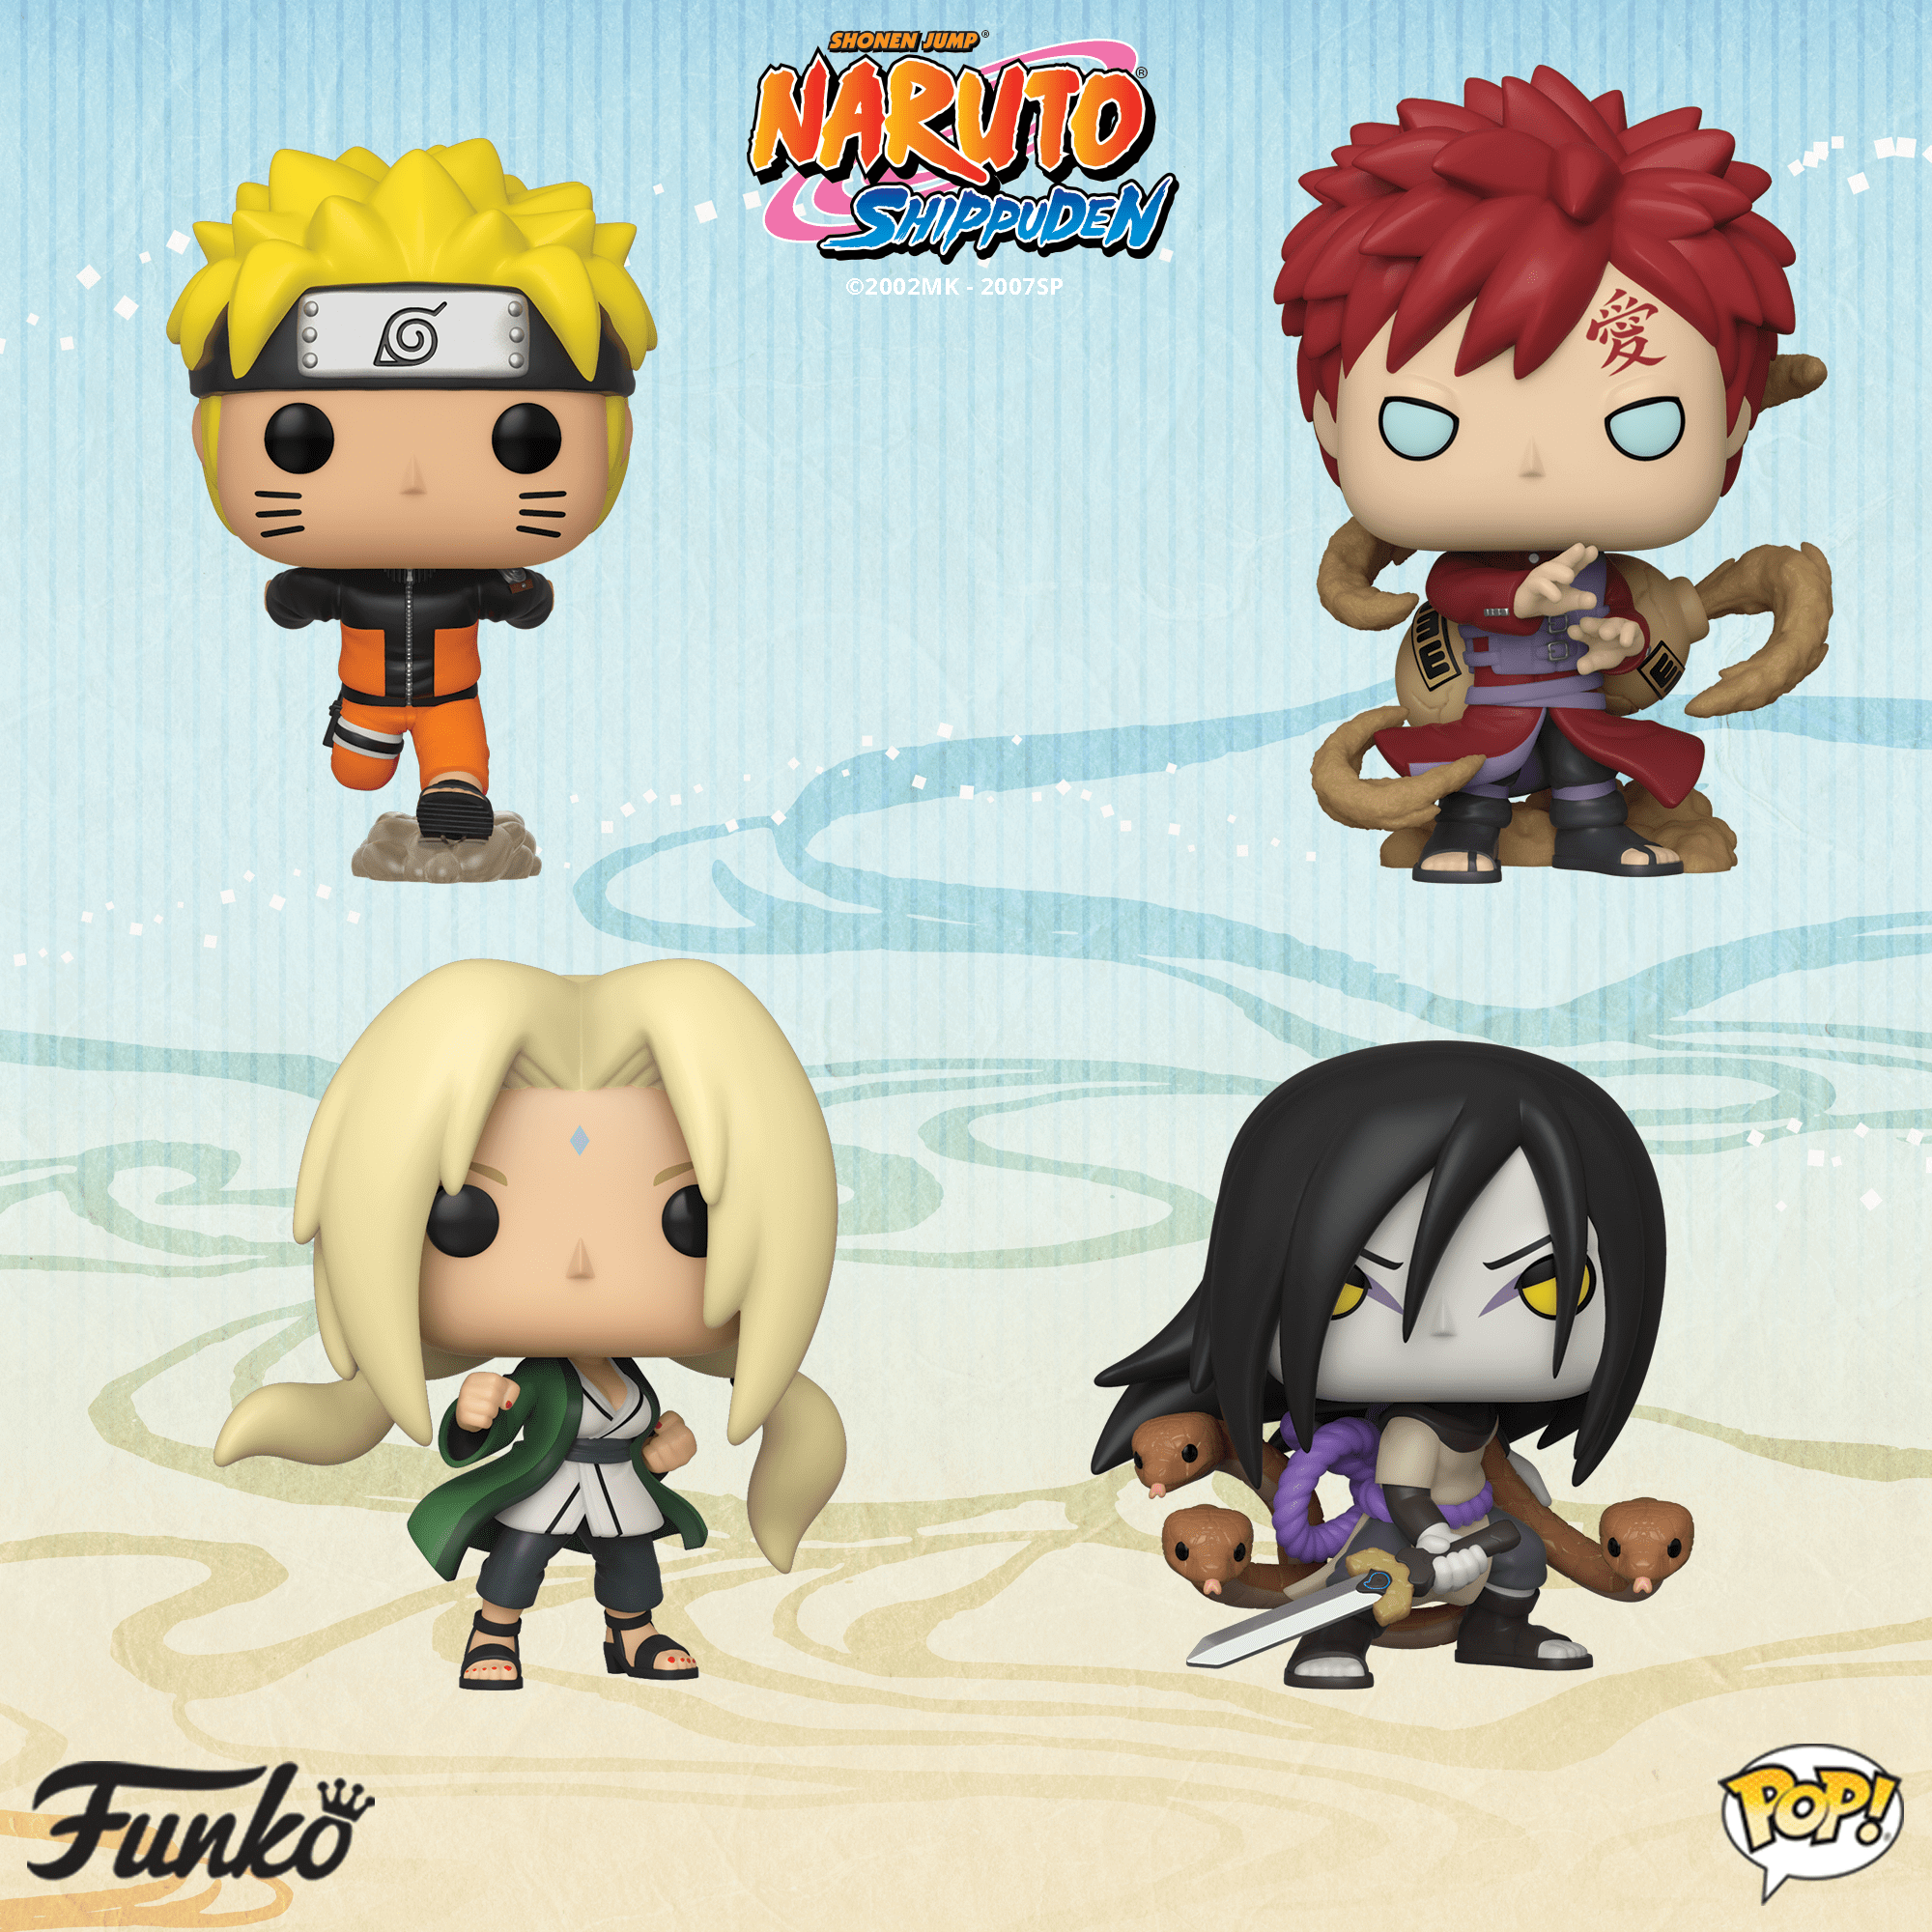 6 new figurines for Naruto